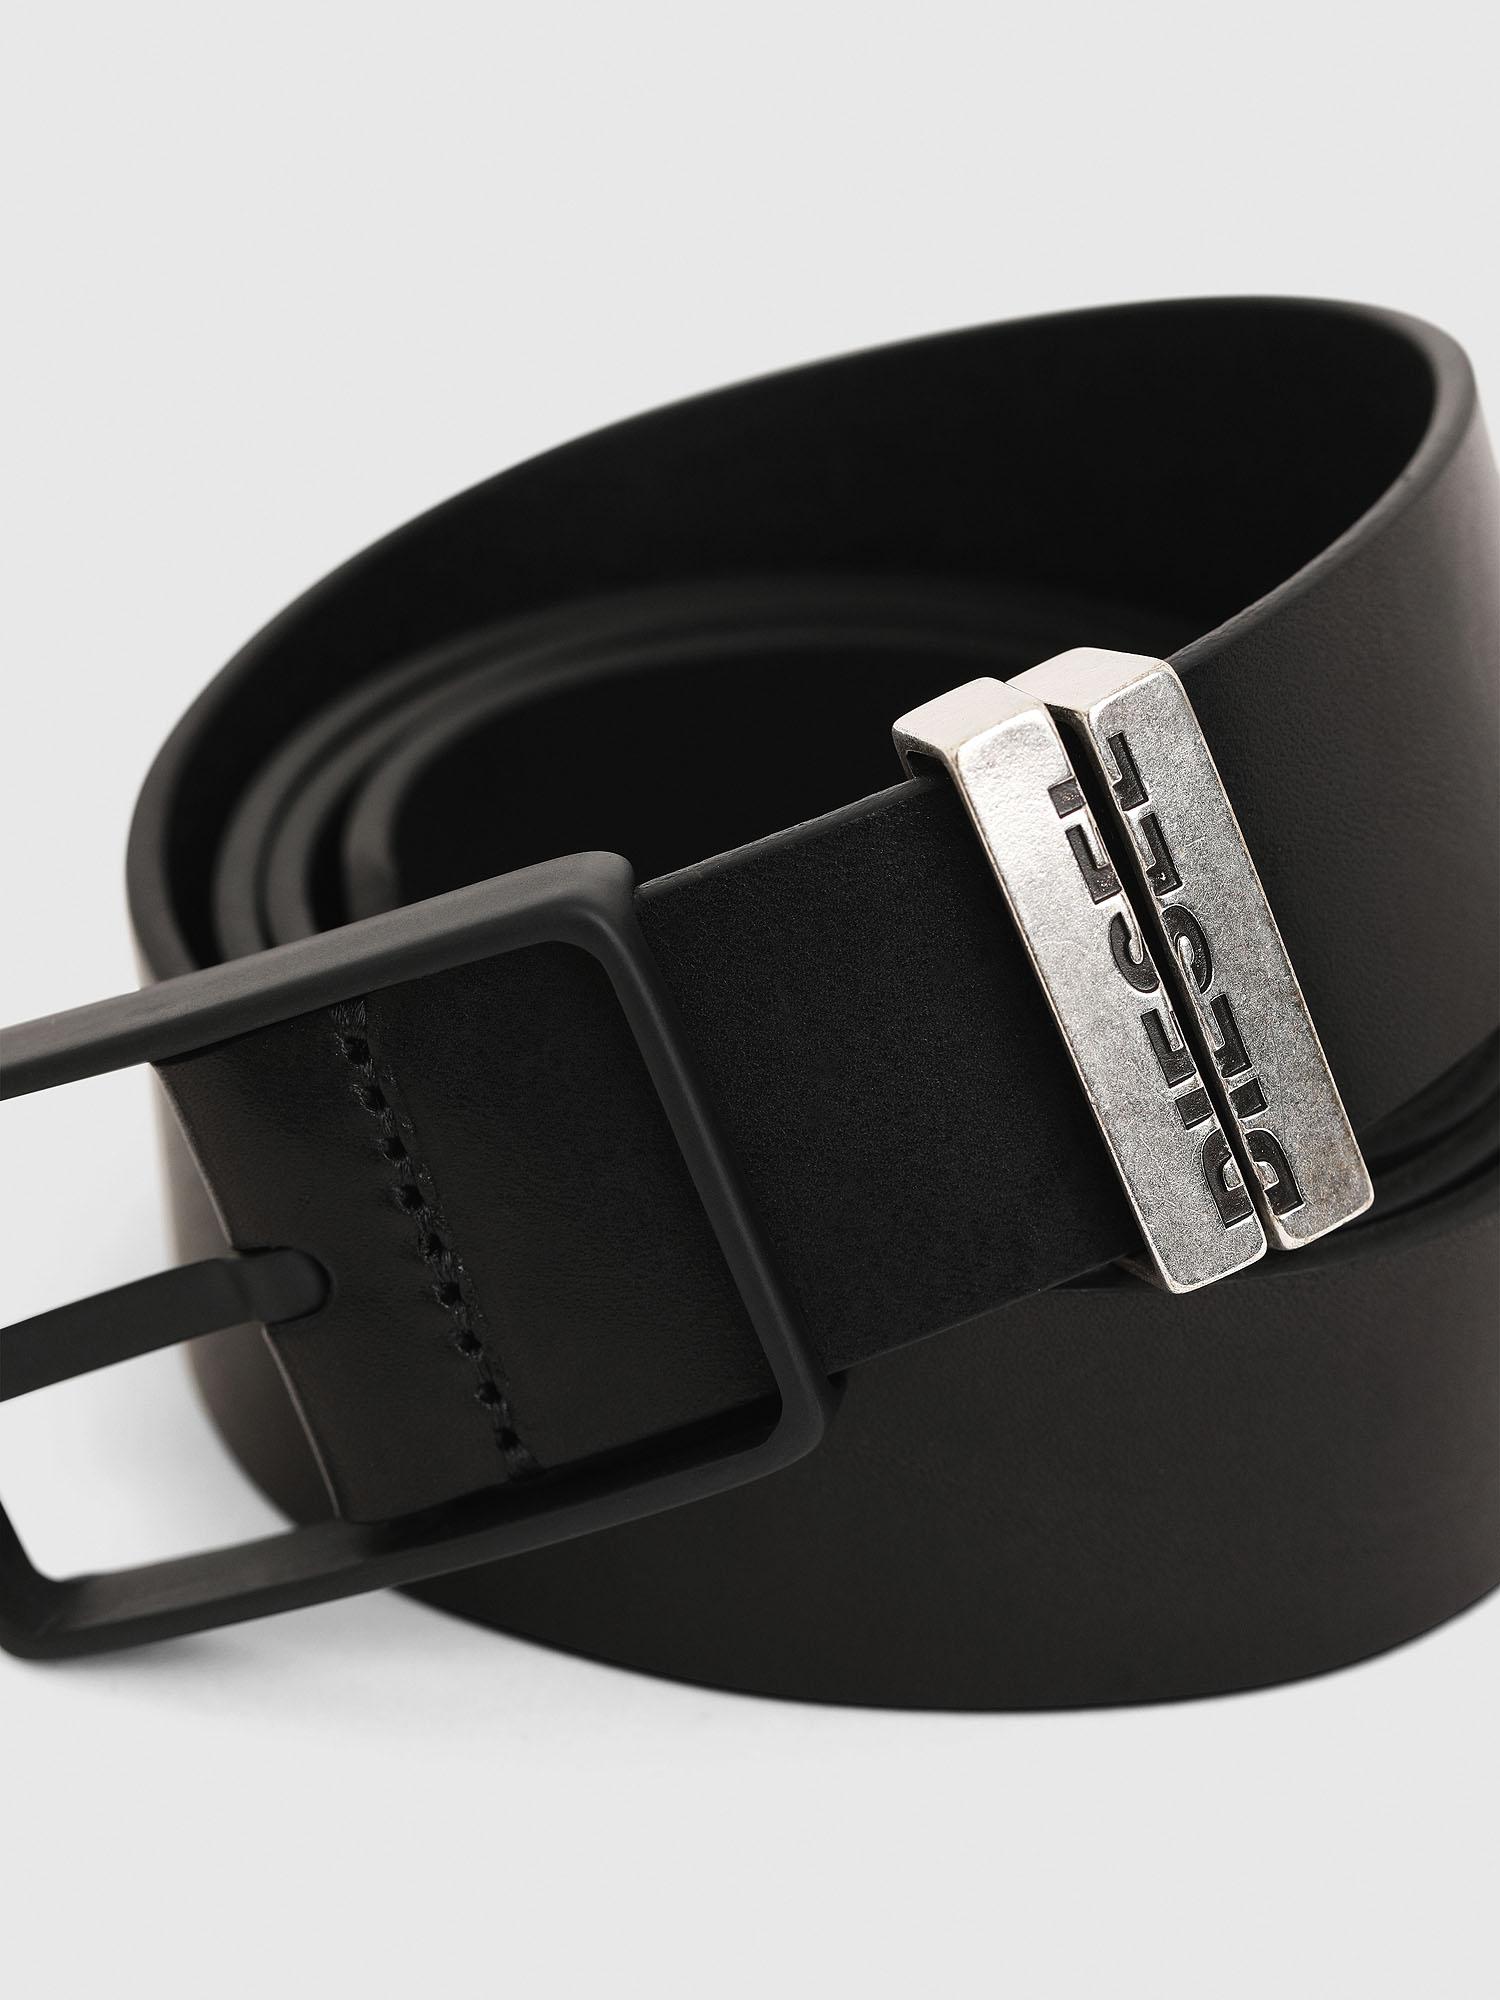 DIESEL B-mid Leather Belt With Pin Buckle in Black for Men - Lyst